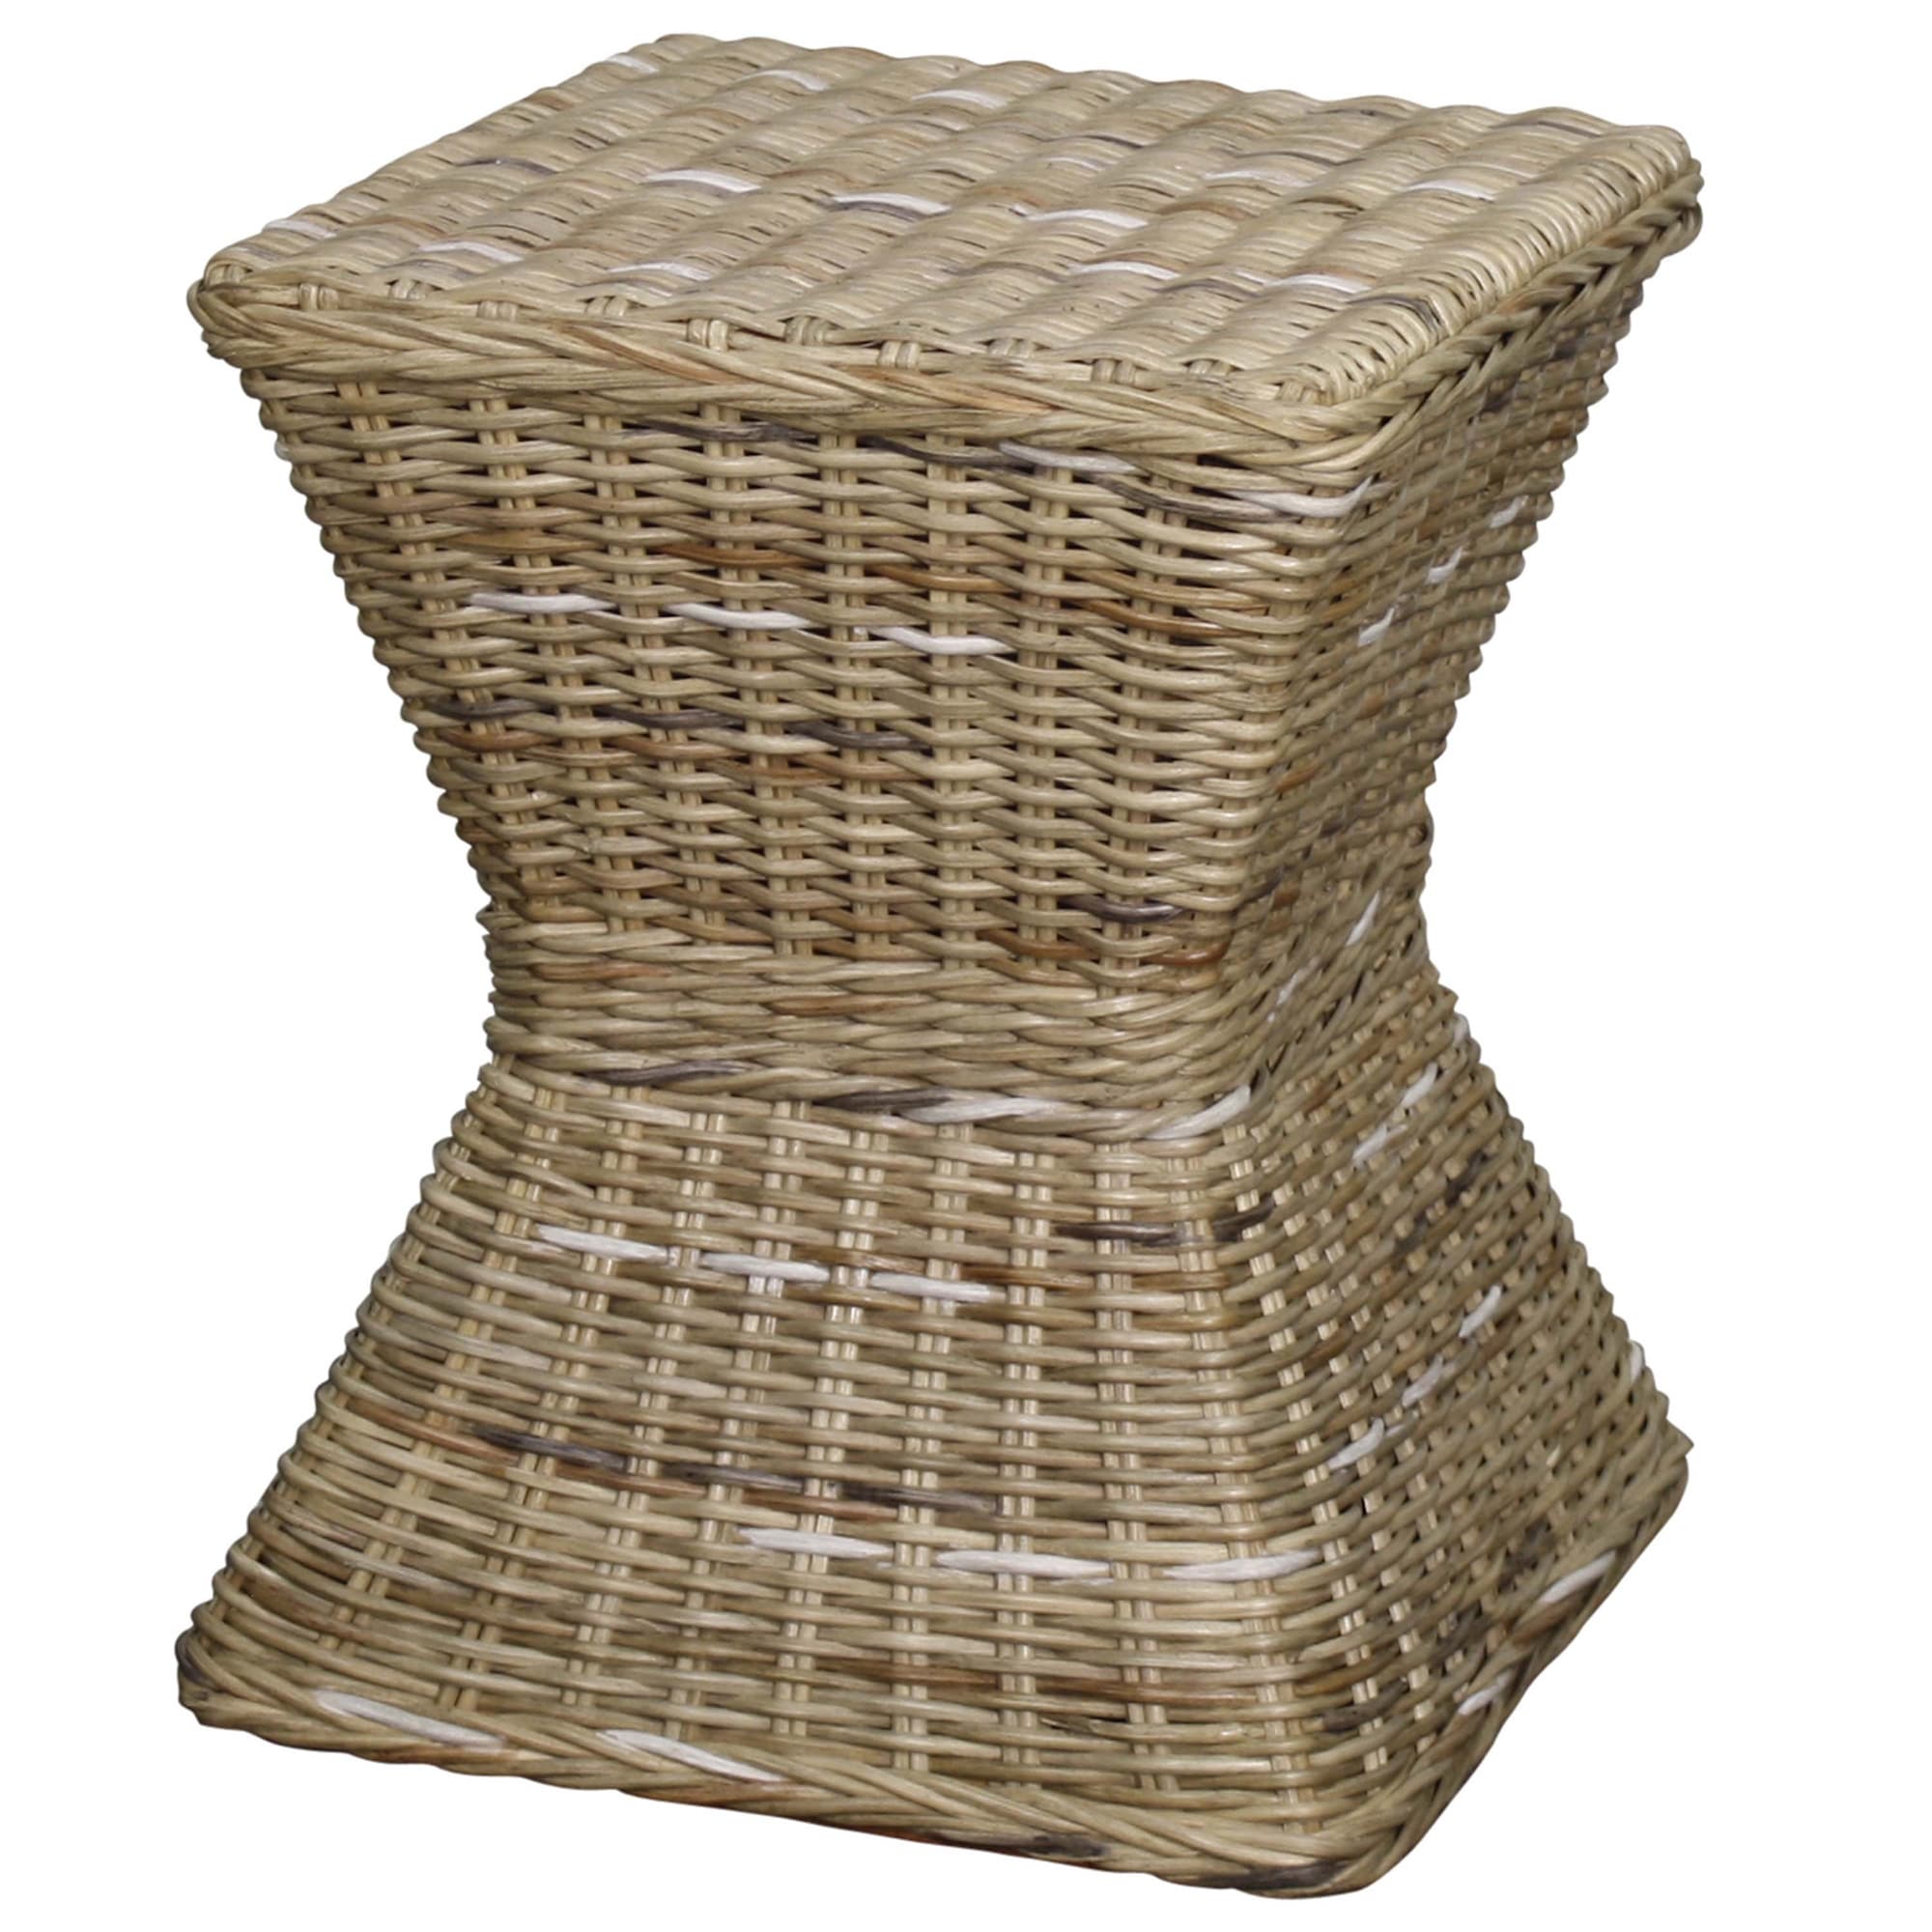 keoni square rattan accent stool table free wicker storage patio shipping today blue bedside lamps teal side round tablecloth grey target end tables coffee shades light coupon